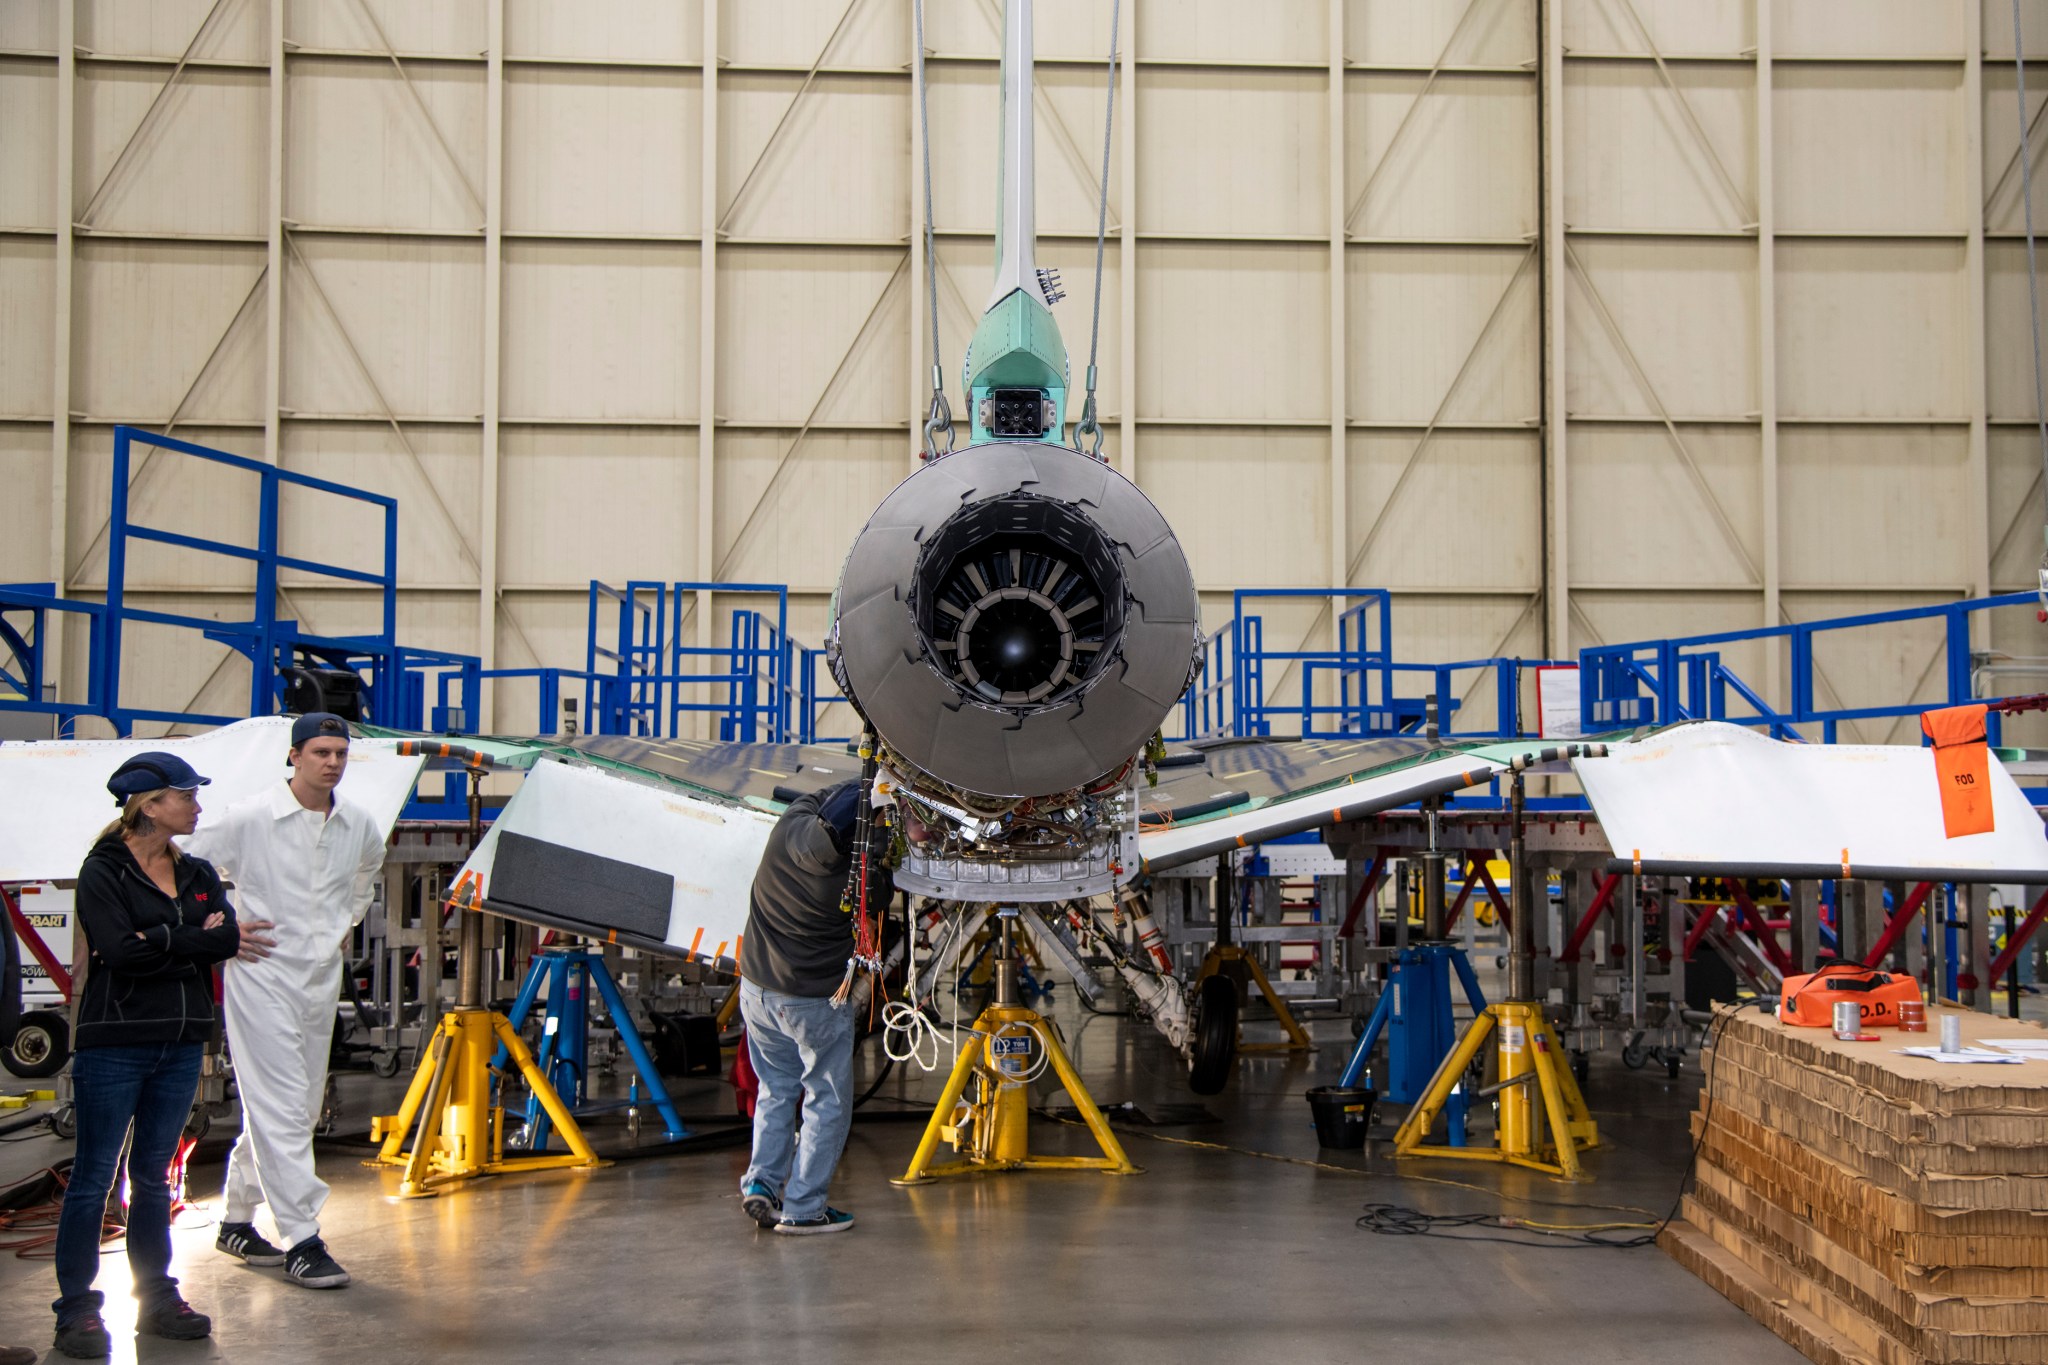 The GE Aviation F414-100 engine is installed in NASA’s quiet supersonic X-59 aircraft, at Lockheed Martin’s Skunk Works facility in Palmdale, California.